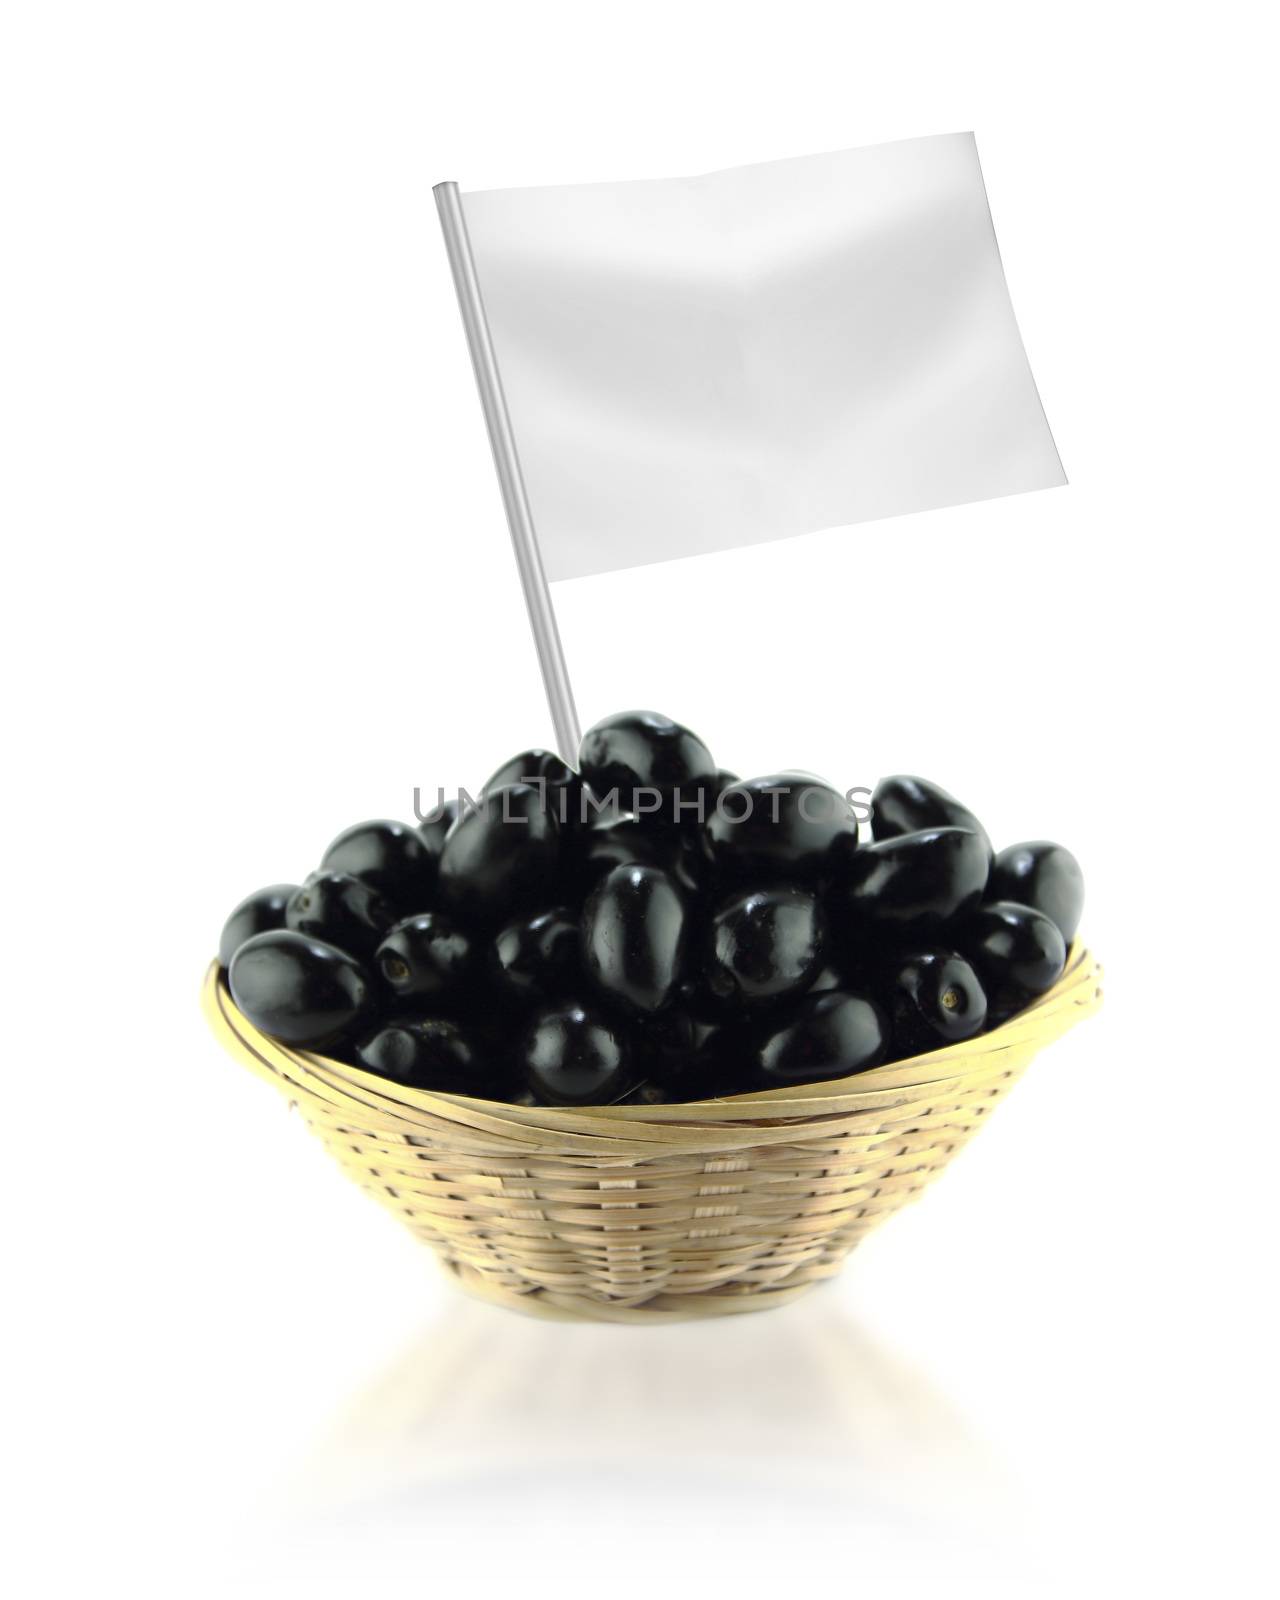 Healthy and organic food concept. Fresh black olives with flag showing the benefits or the price of fruits.